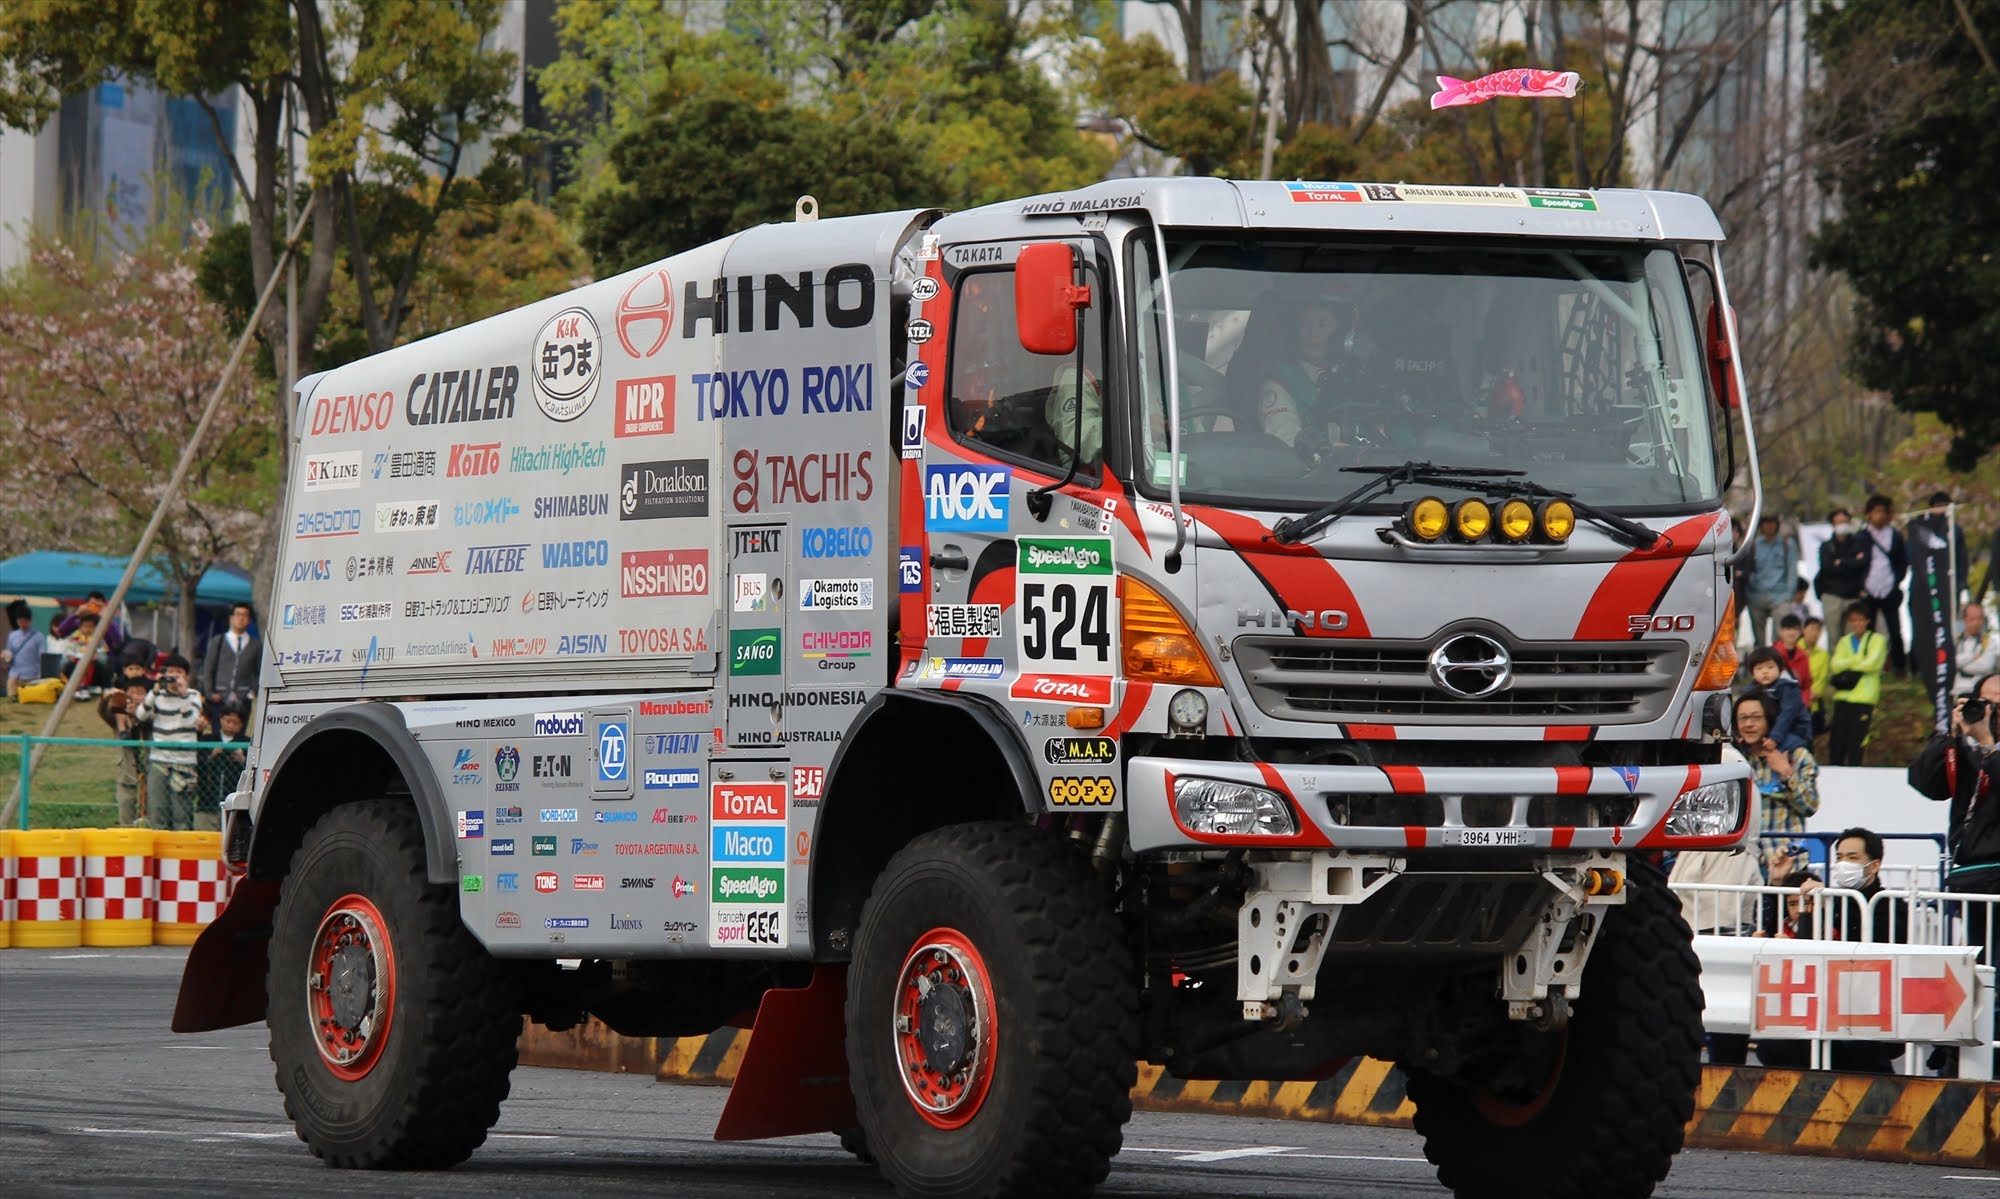 Hino Trucks and Engines in Australia. Information, History and Specifications.